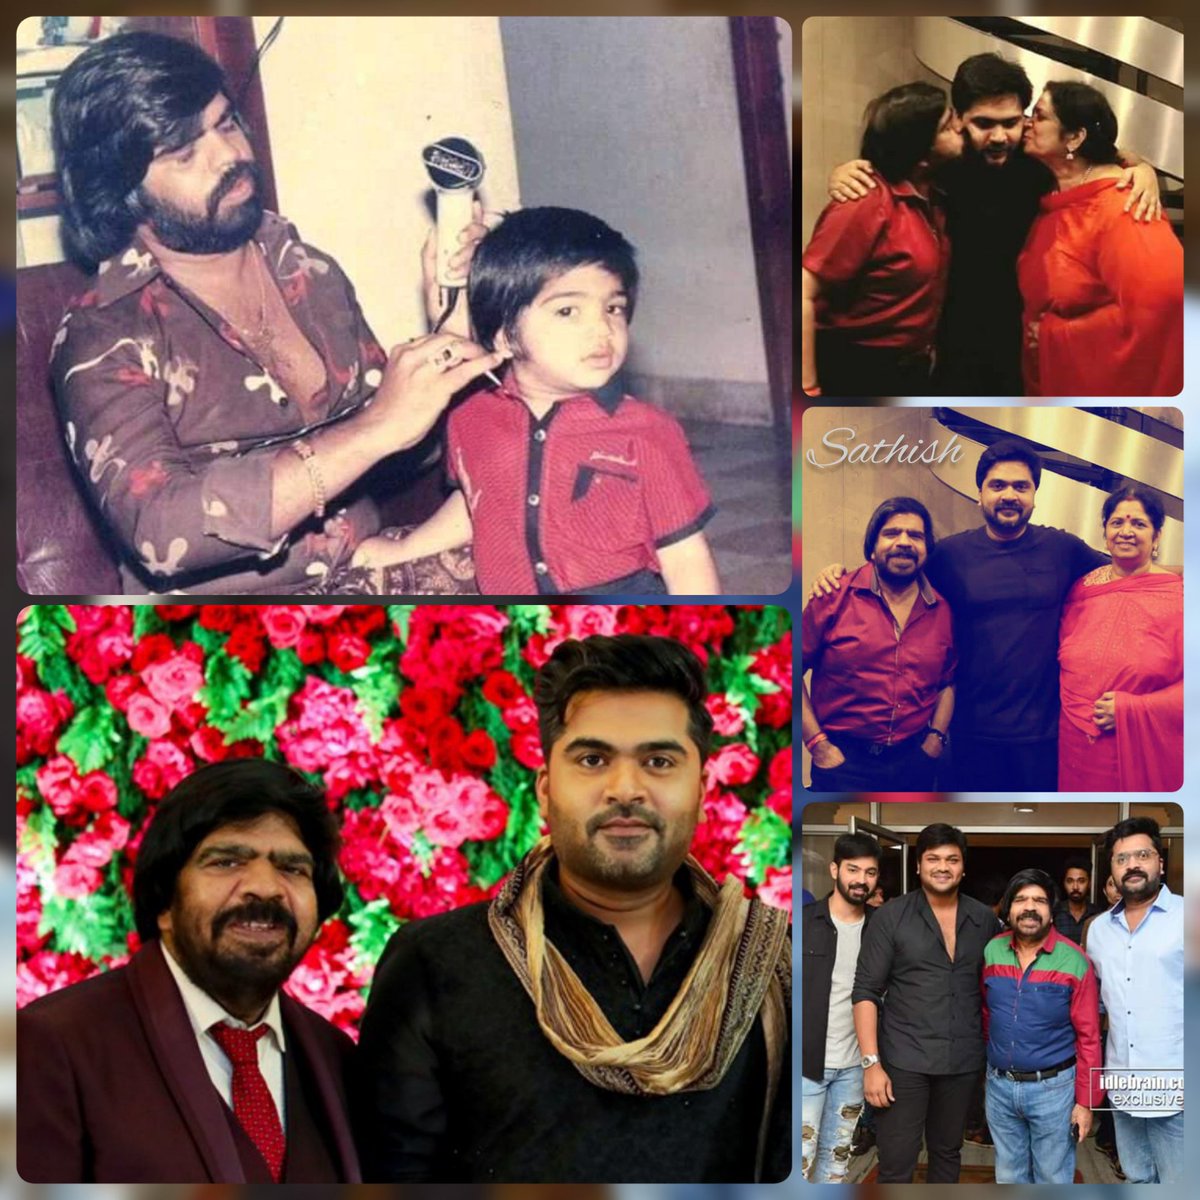 Happy birthday Appa T.Rajendar 😊🎁 Thanking you for being the Pillar of Strength for #STR & #STRBLOODS Always 🎁😊🎇🎈🎂🎊🎉🎂🎈Wishes from #TeamSilambarasanTR 🎈❤️

#HBDTRajendar  #HappyBirthdayTRajendar 

@kuraltv